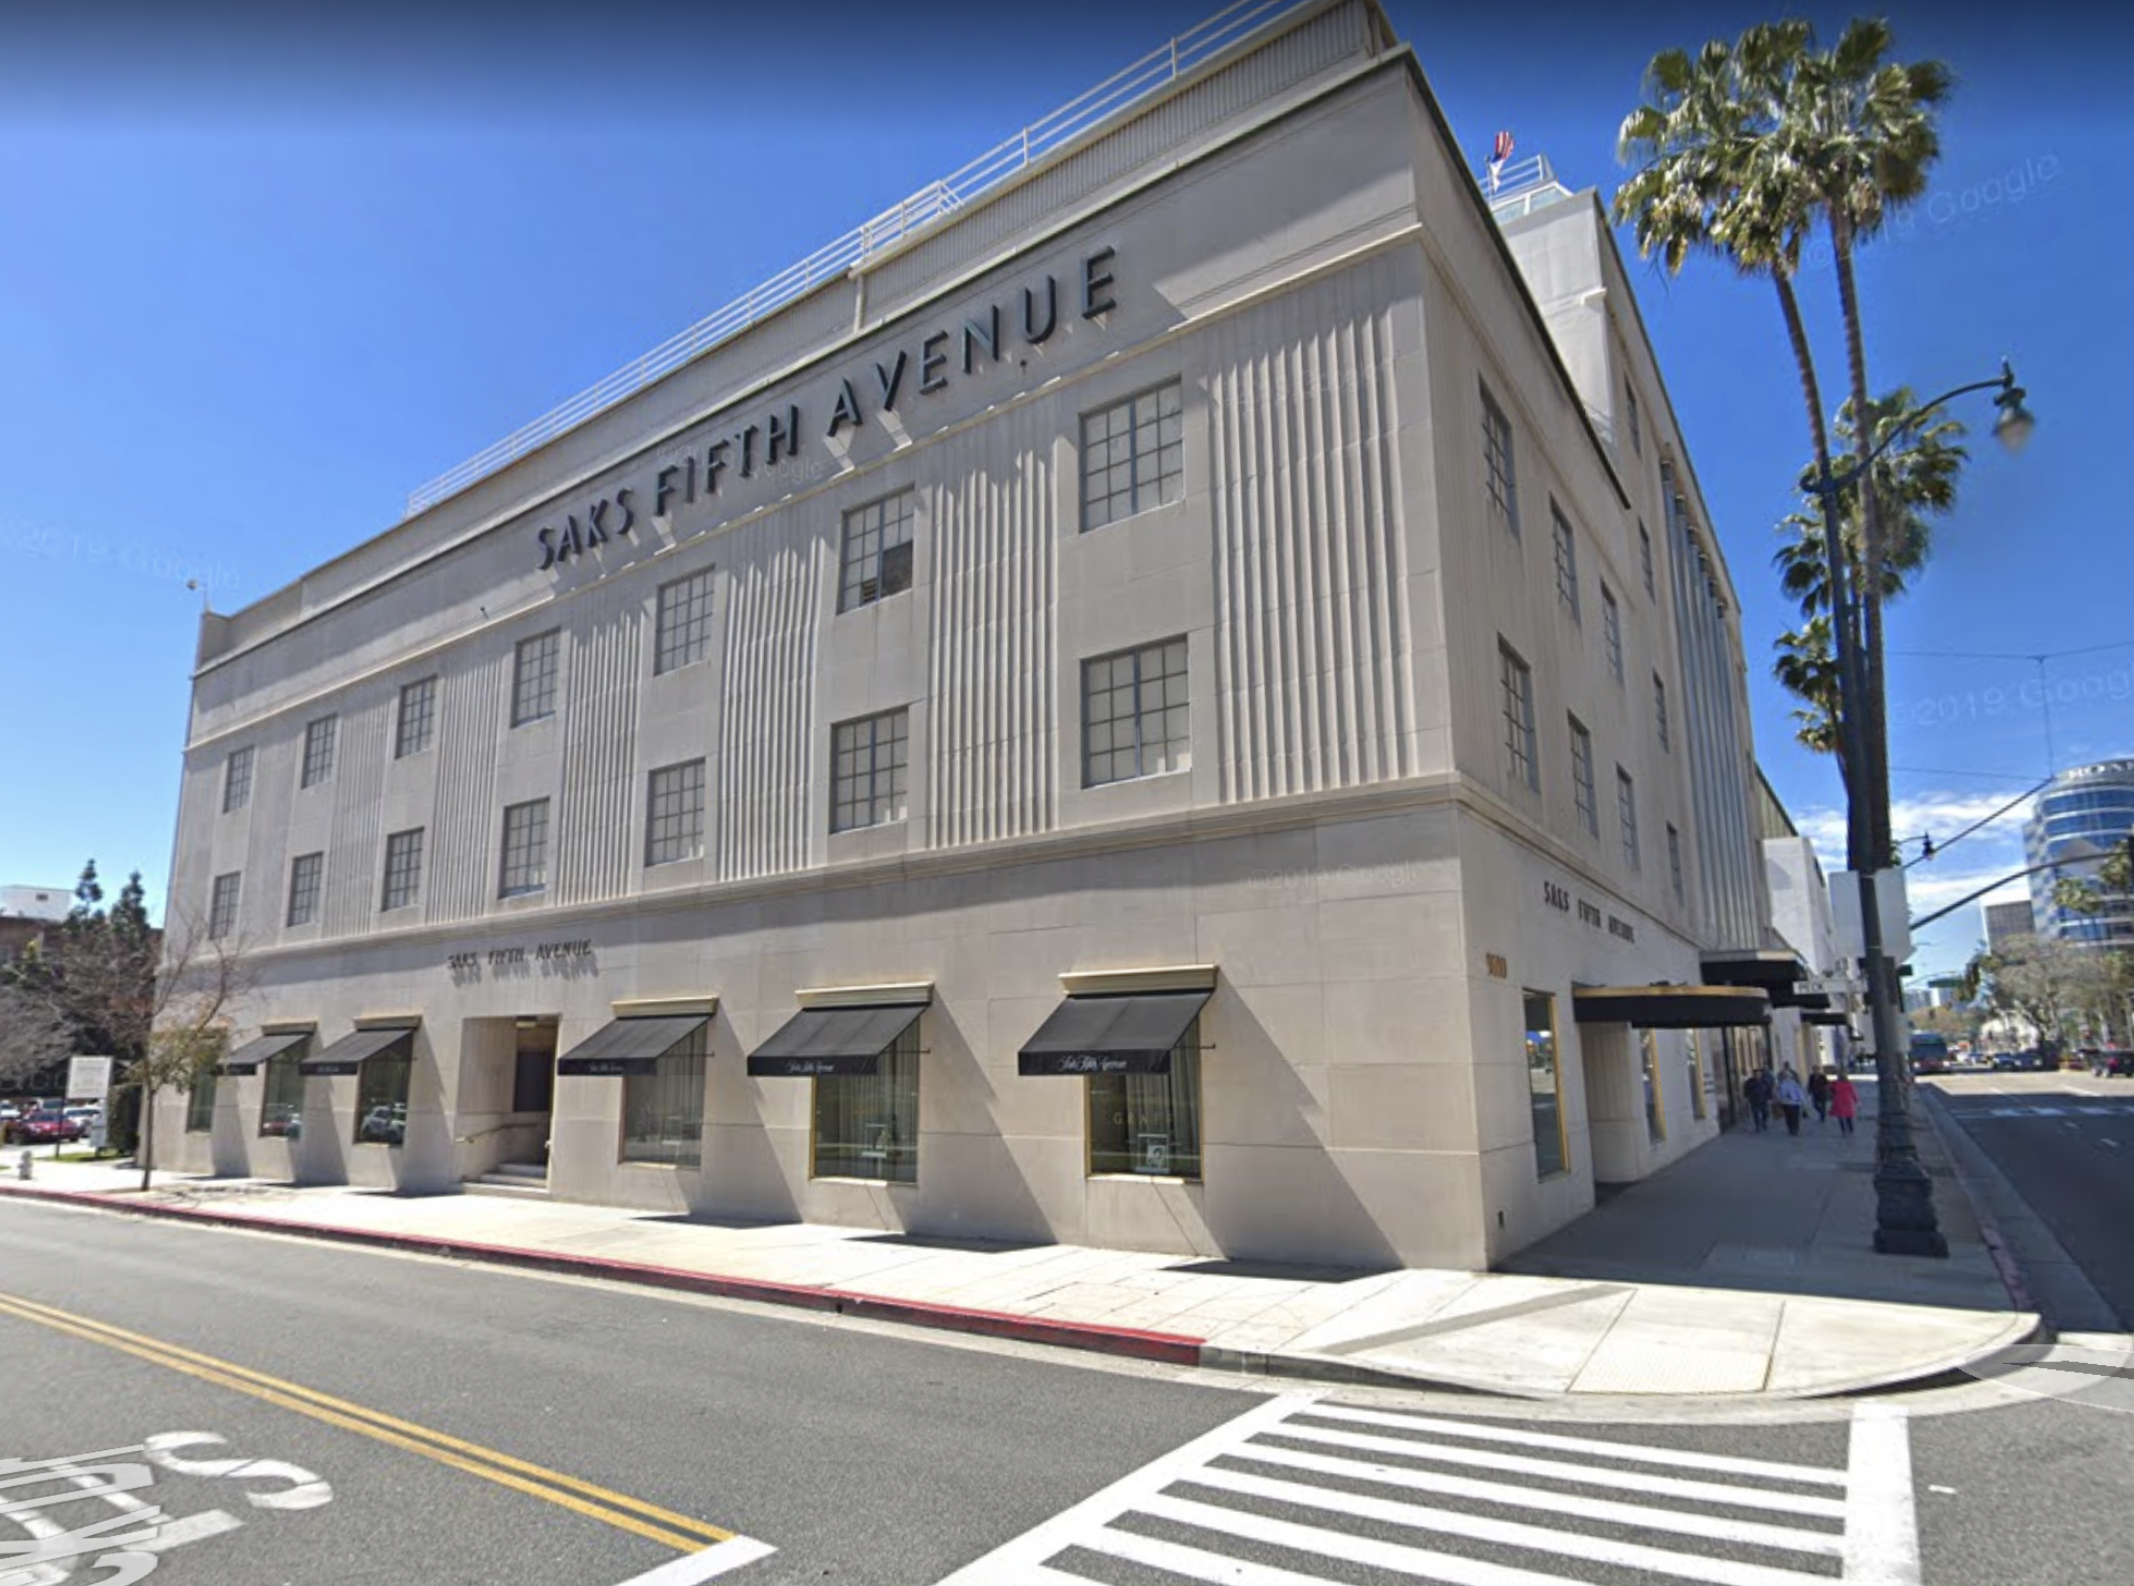 Beverly Hills, CA/USA - Saks Fifth Avenue store in Beverly Hills